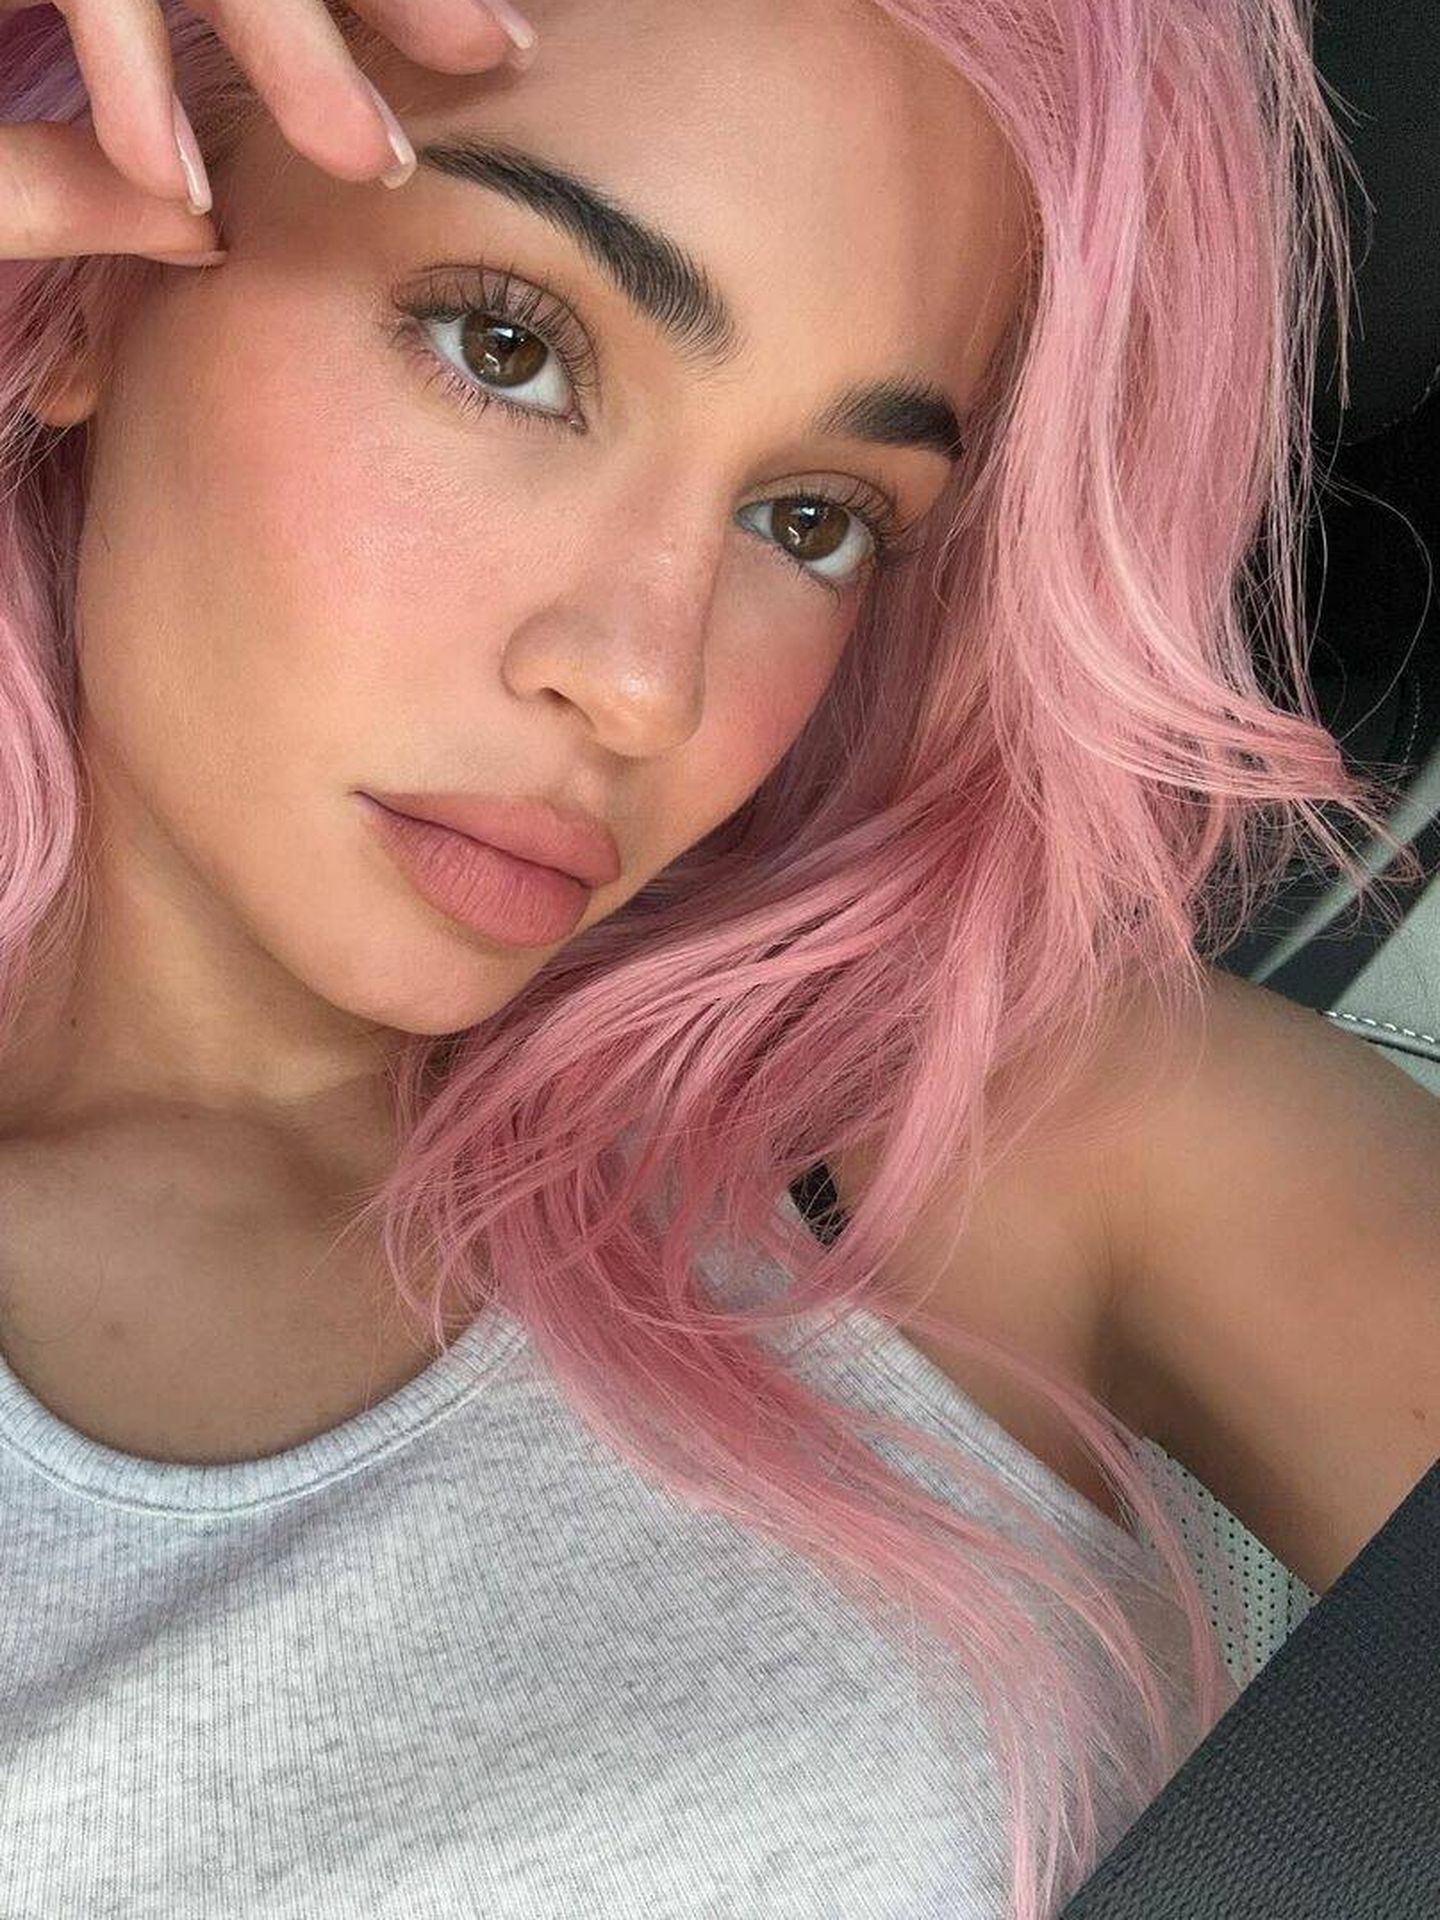 Kylie Jenner con melena rosa chicle. (Instagram/@kyliejenner)